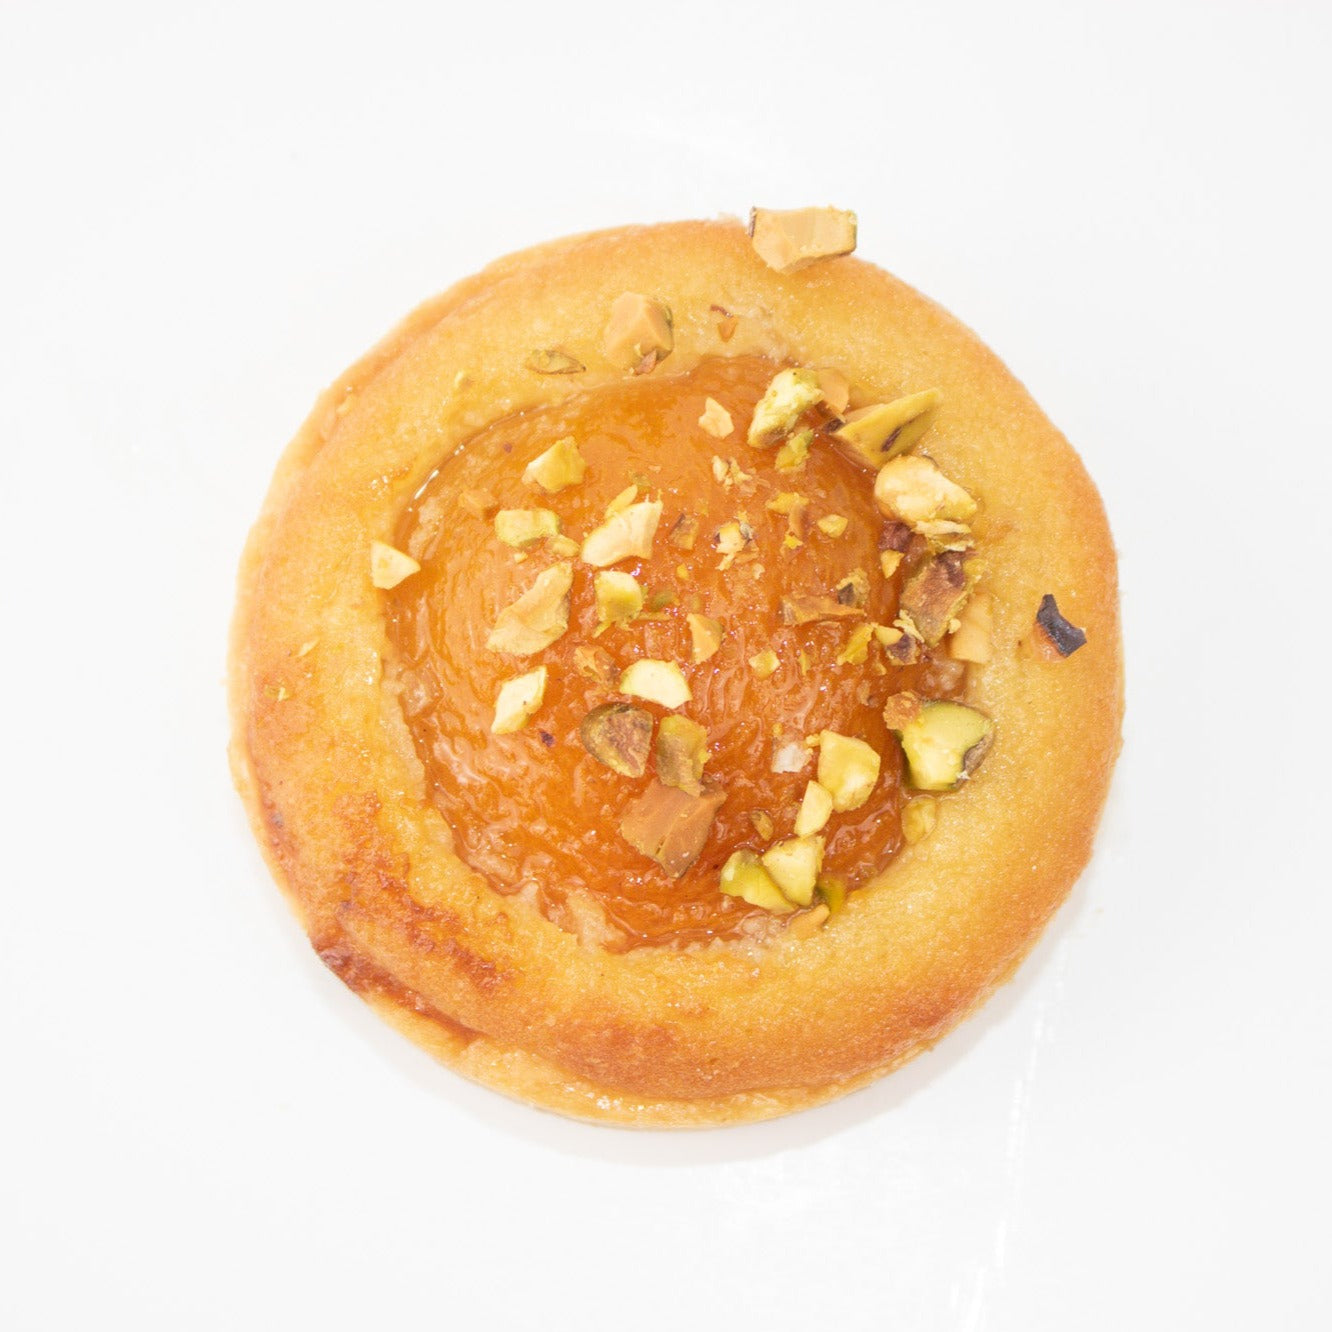 Image of top of the apricot tart with pistachios sprinkled on it